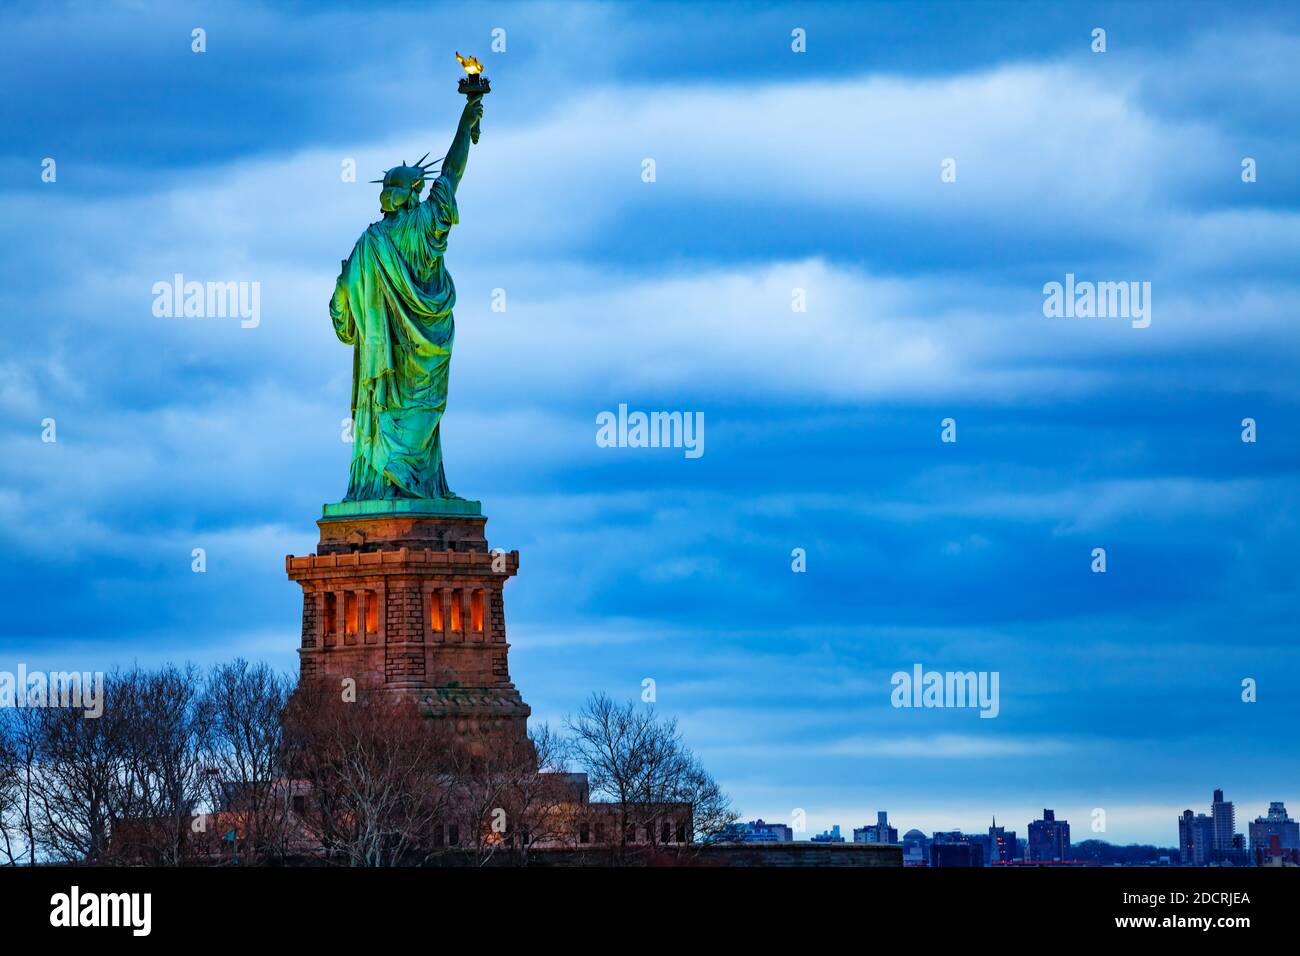 The Statue of Liberty over the New York cityscape from Black Tom Island at evening dusk Stock Photo